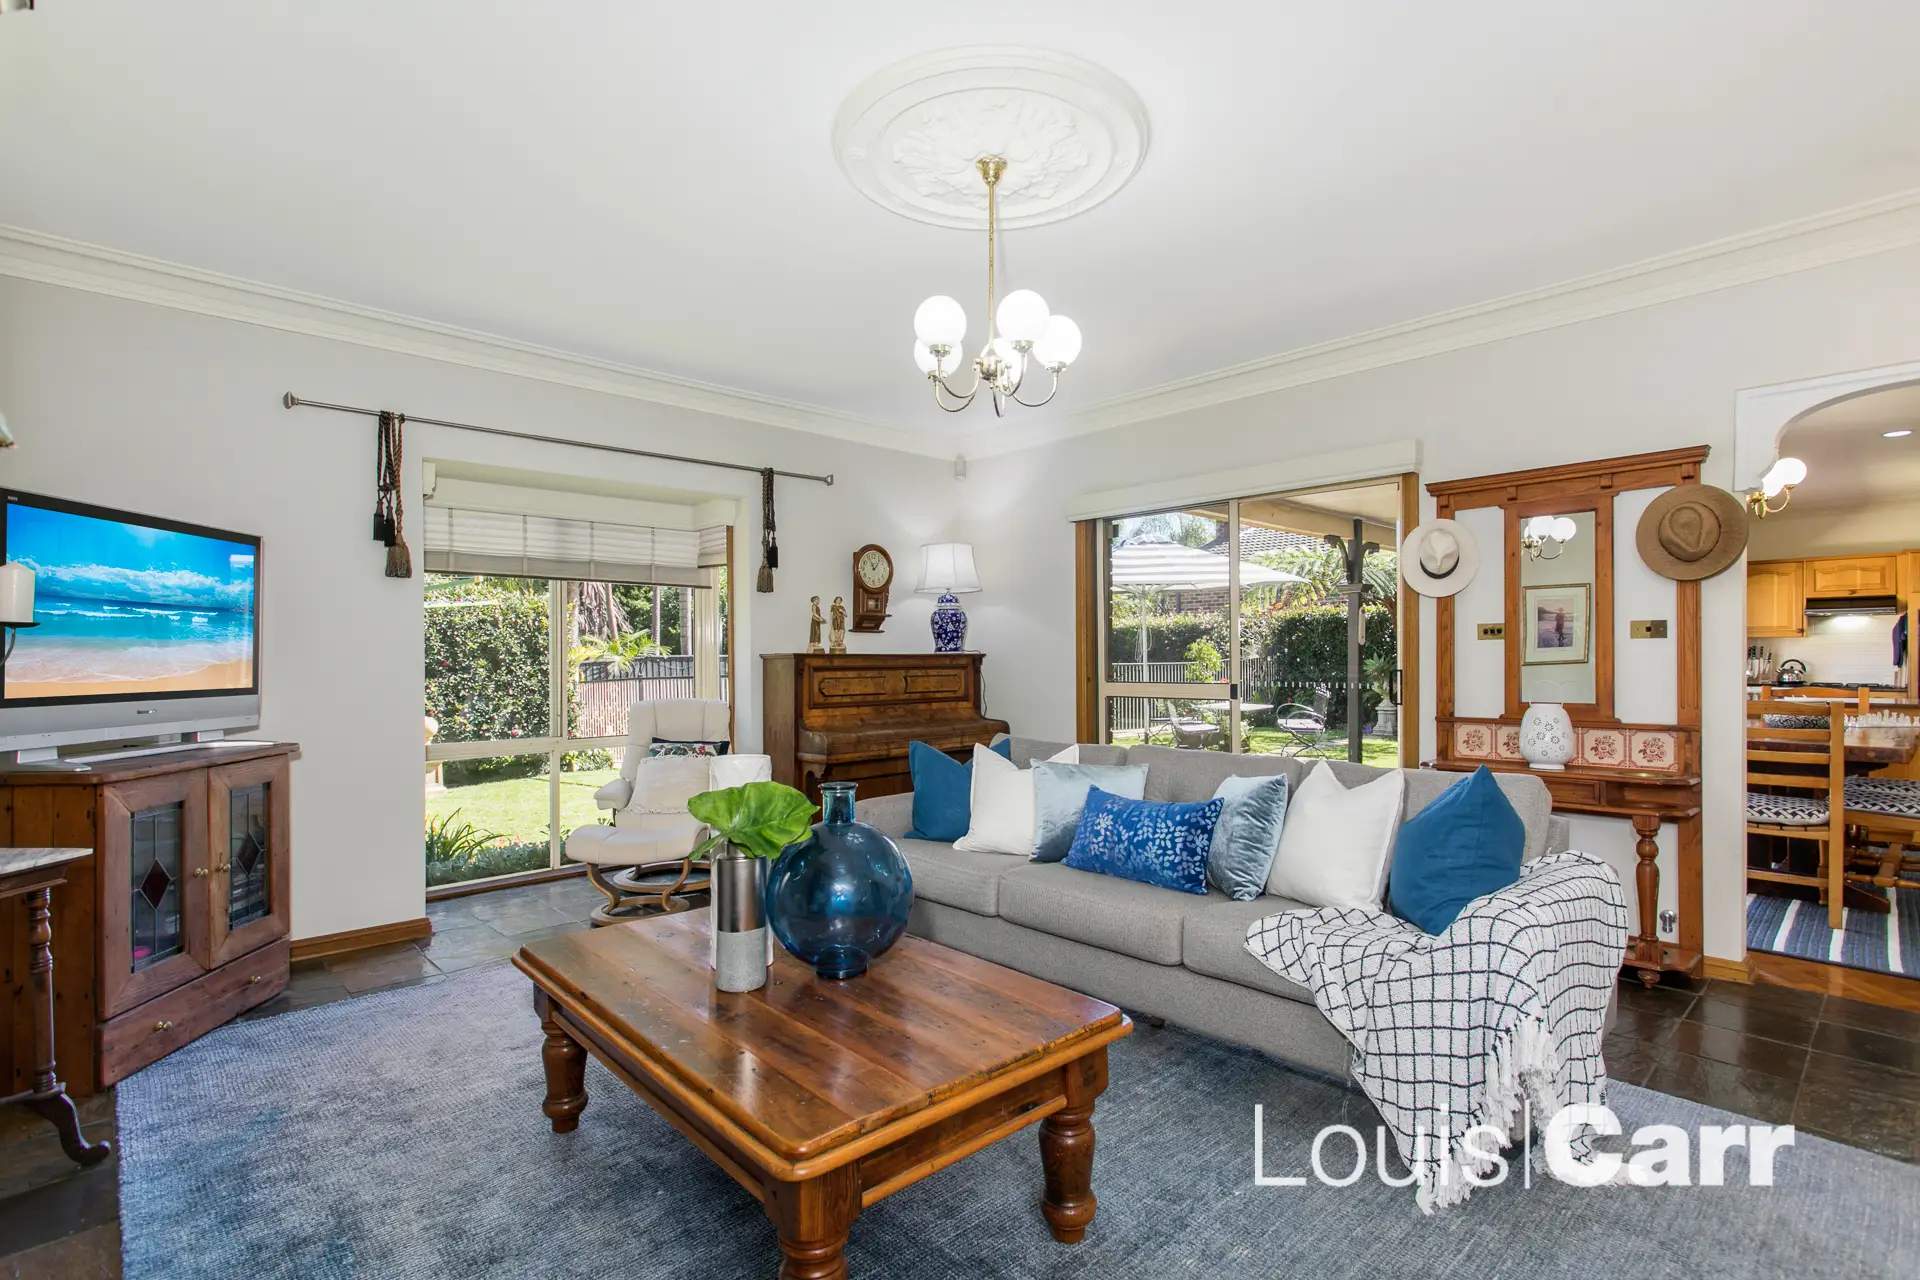 Photo #5: 15 Josephine Crescent, Cherrybrook - Sold by Louis Carr Real Estate